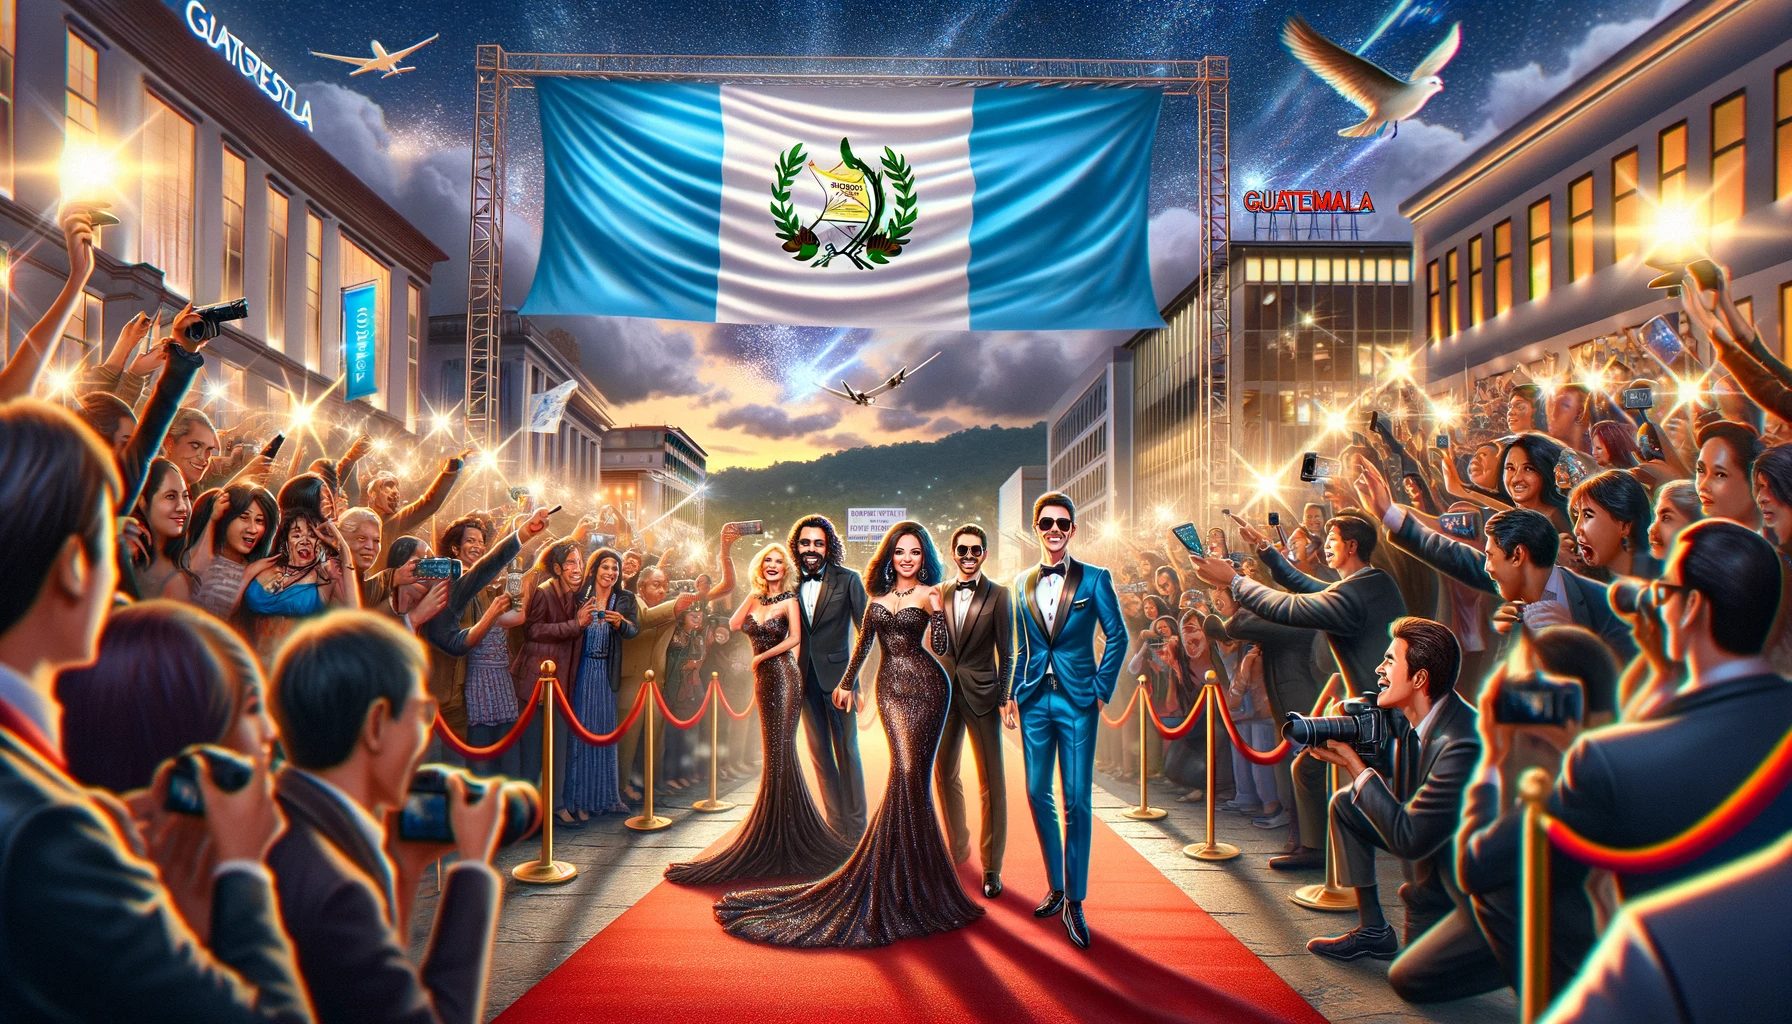 Celebrity event under Guatemala flag with excited crowd.